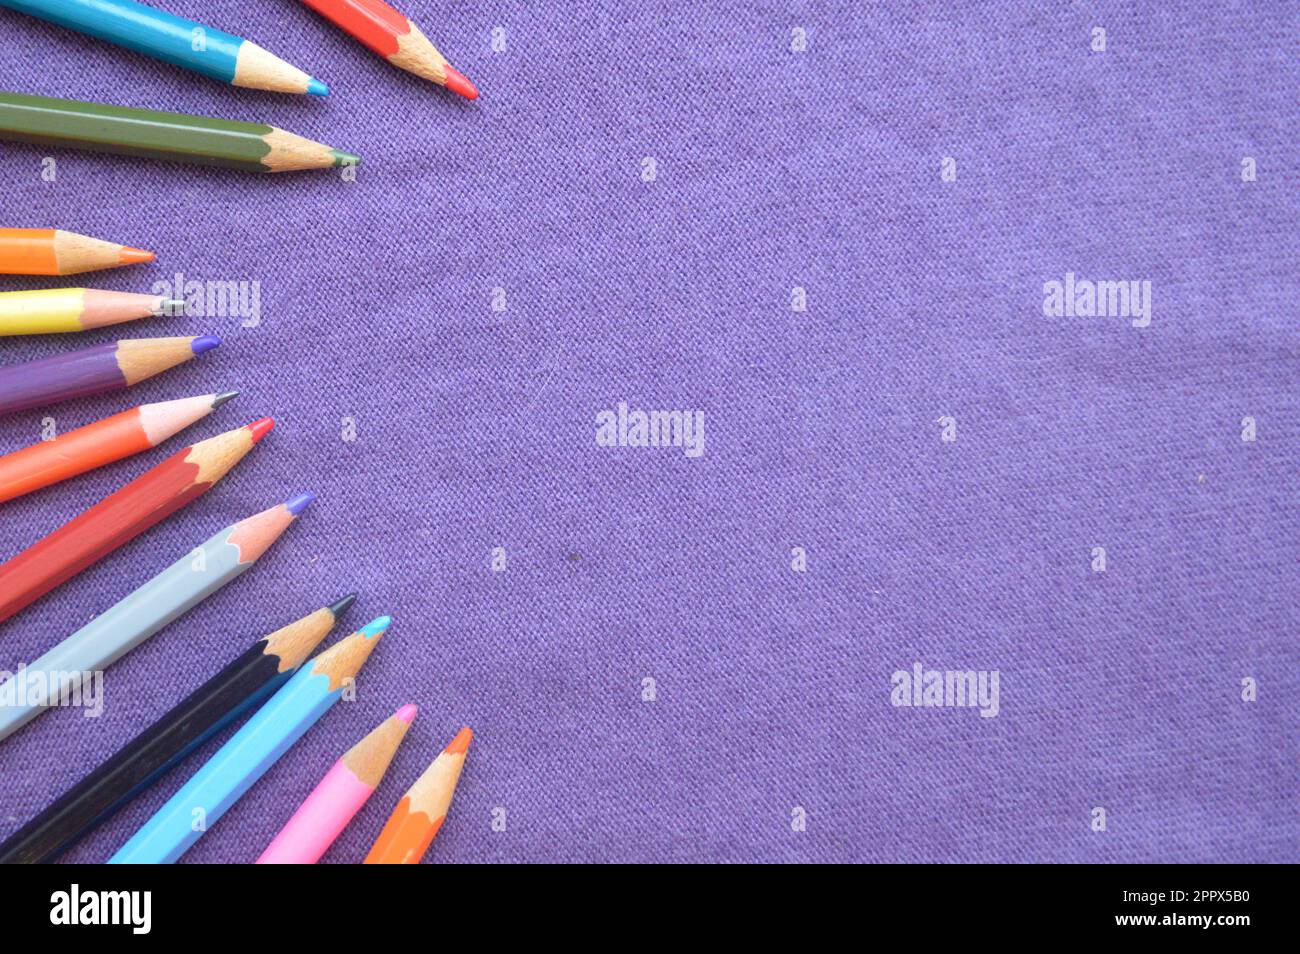 https://c8.alamy.com/comp/2PPX5B0/multicolored-bright-colorful-pencils-for-drawing-on-the-left-by-an-arc-and-a-place-for-your-text-on-a-background-of-purple-cloth-2PPX5B0.jpg